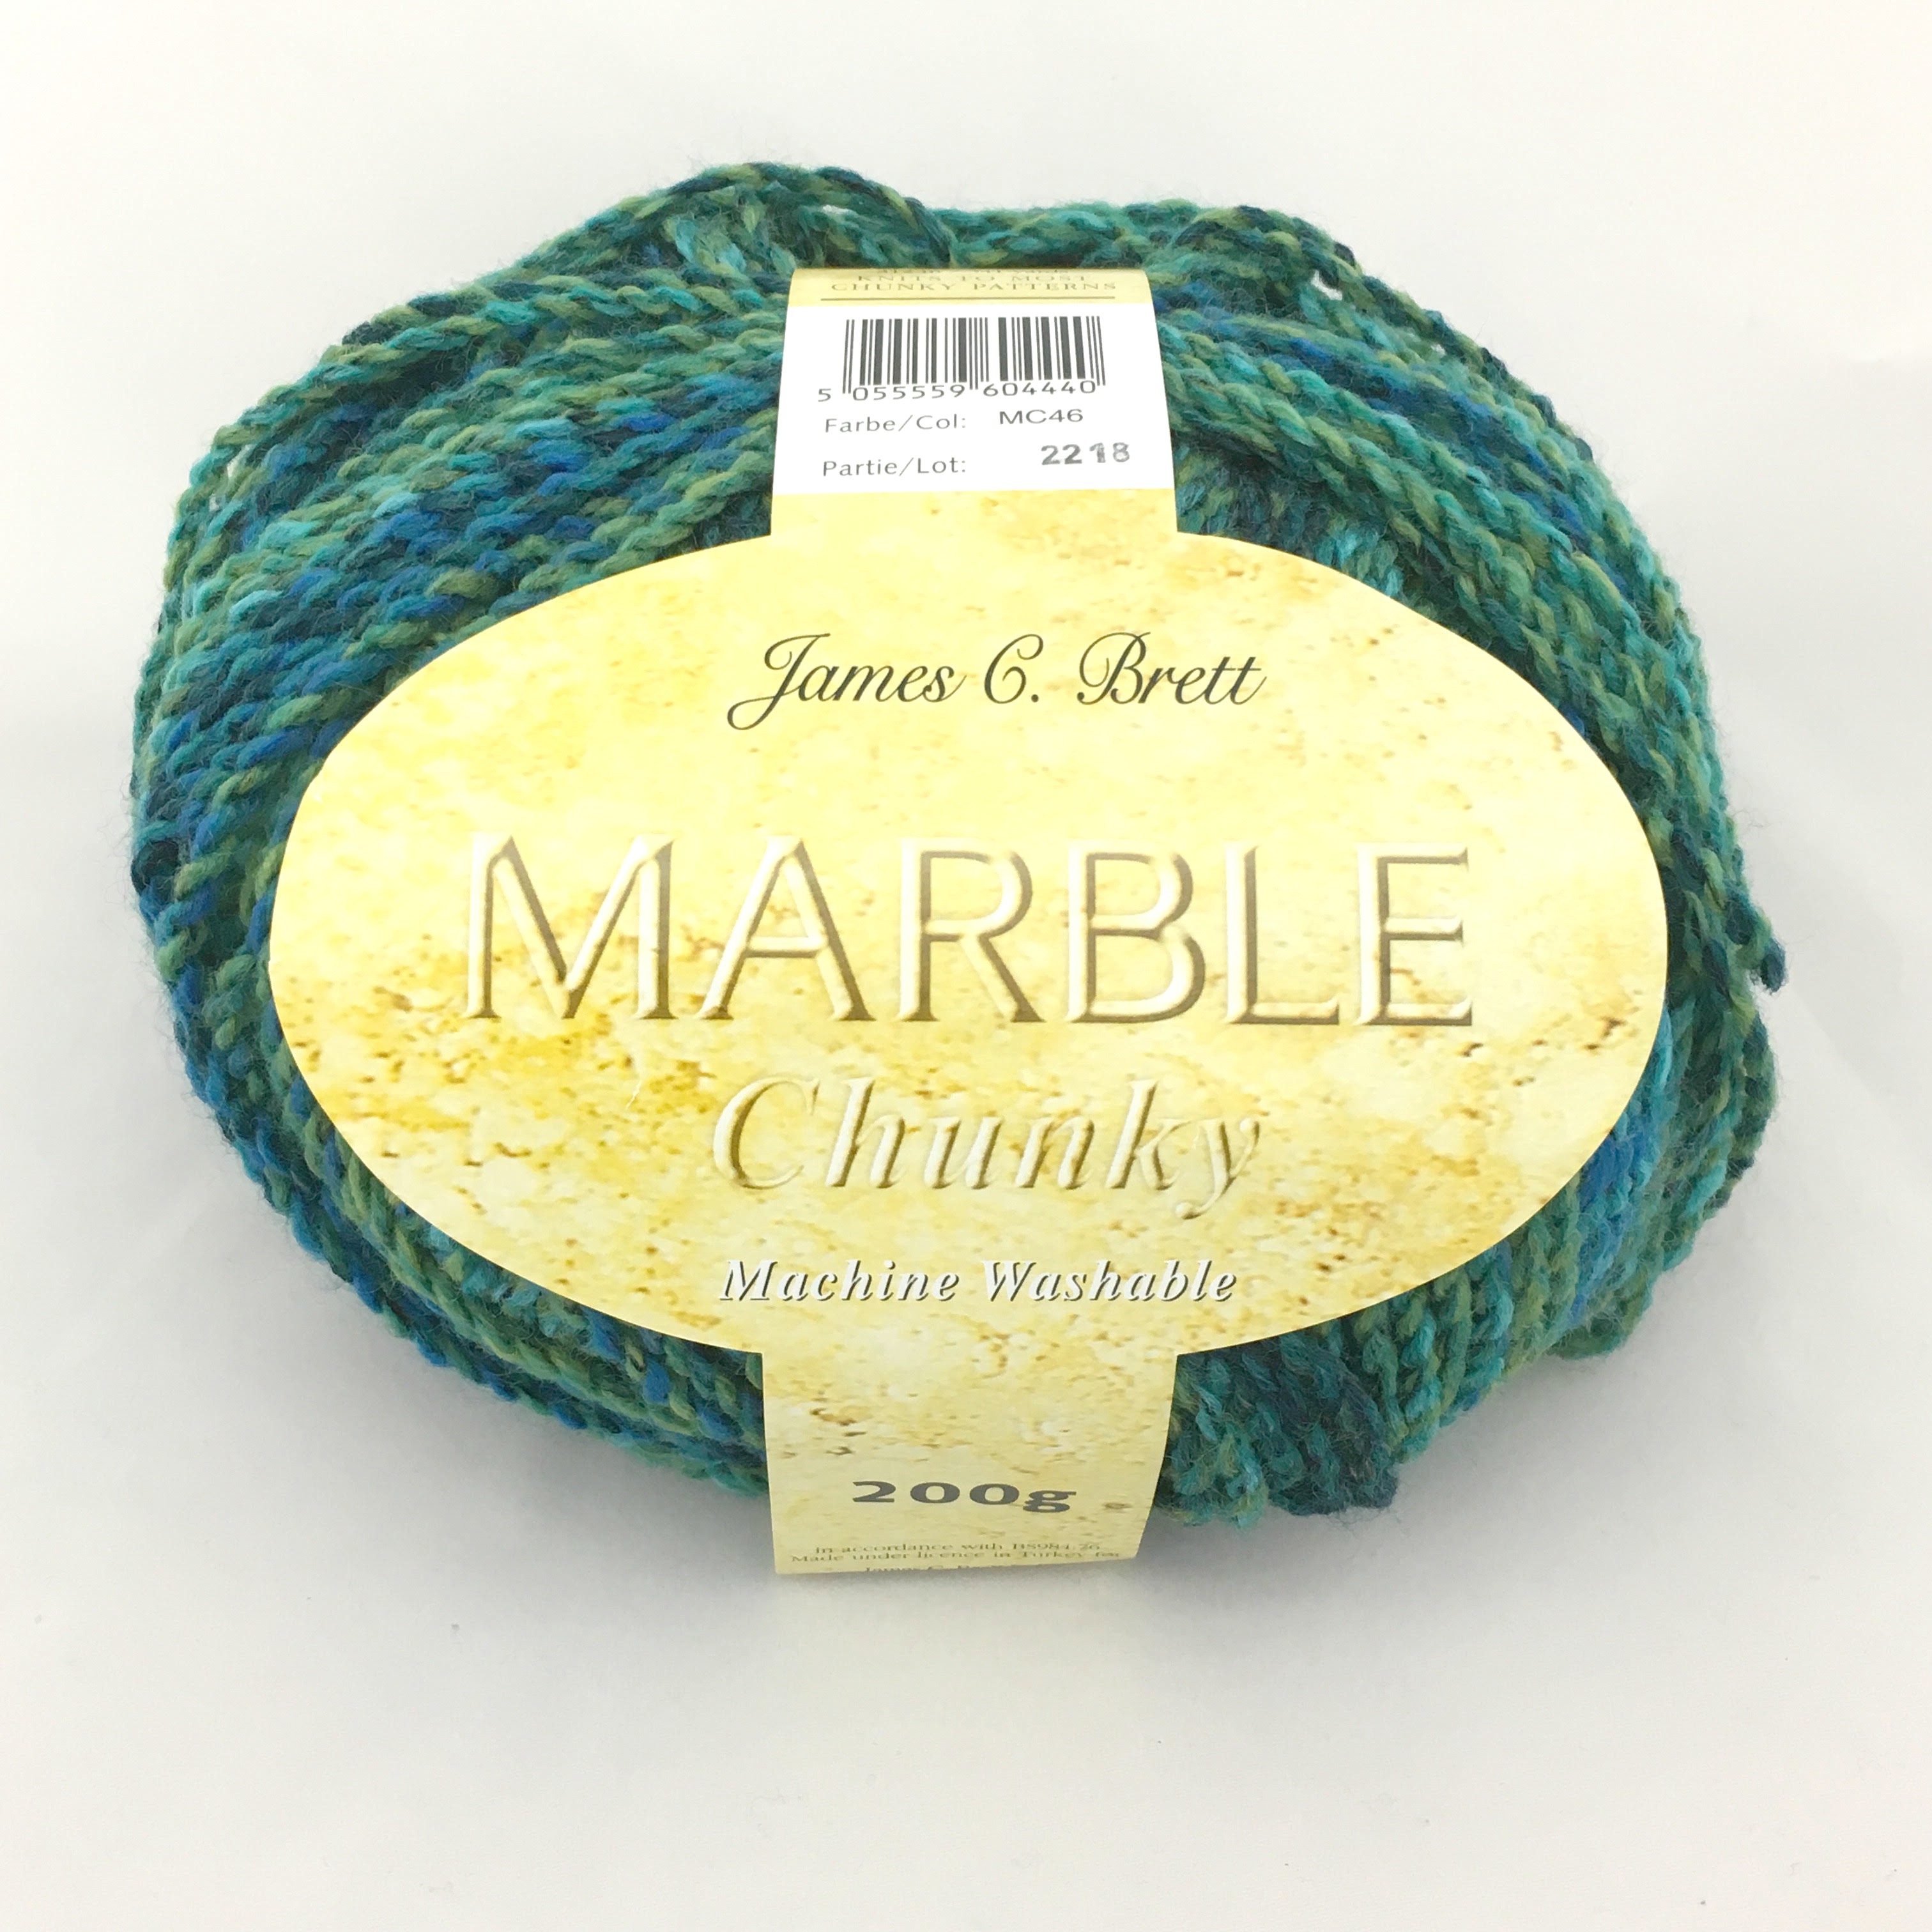 Yarn - Marble Chunky in Blue Green Mix by James C Brett in Colour MC46